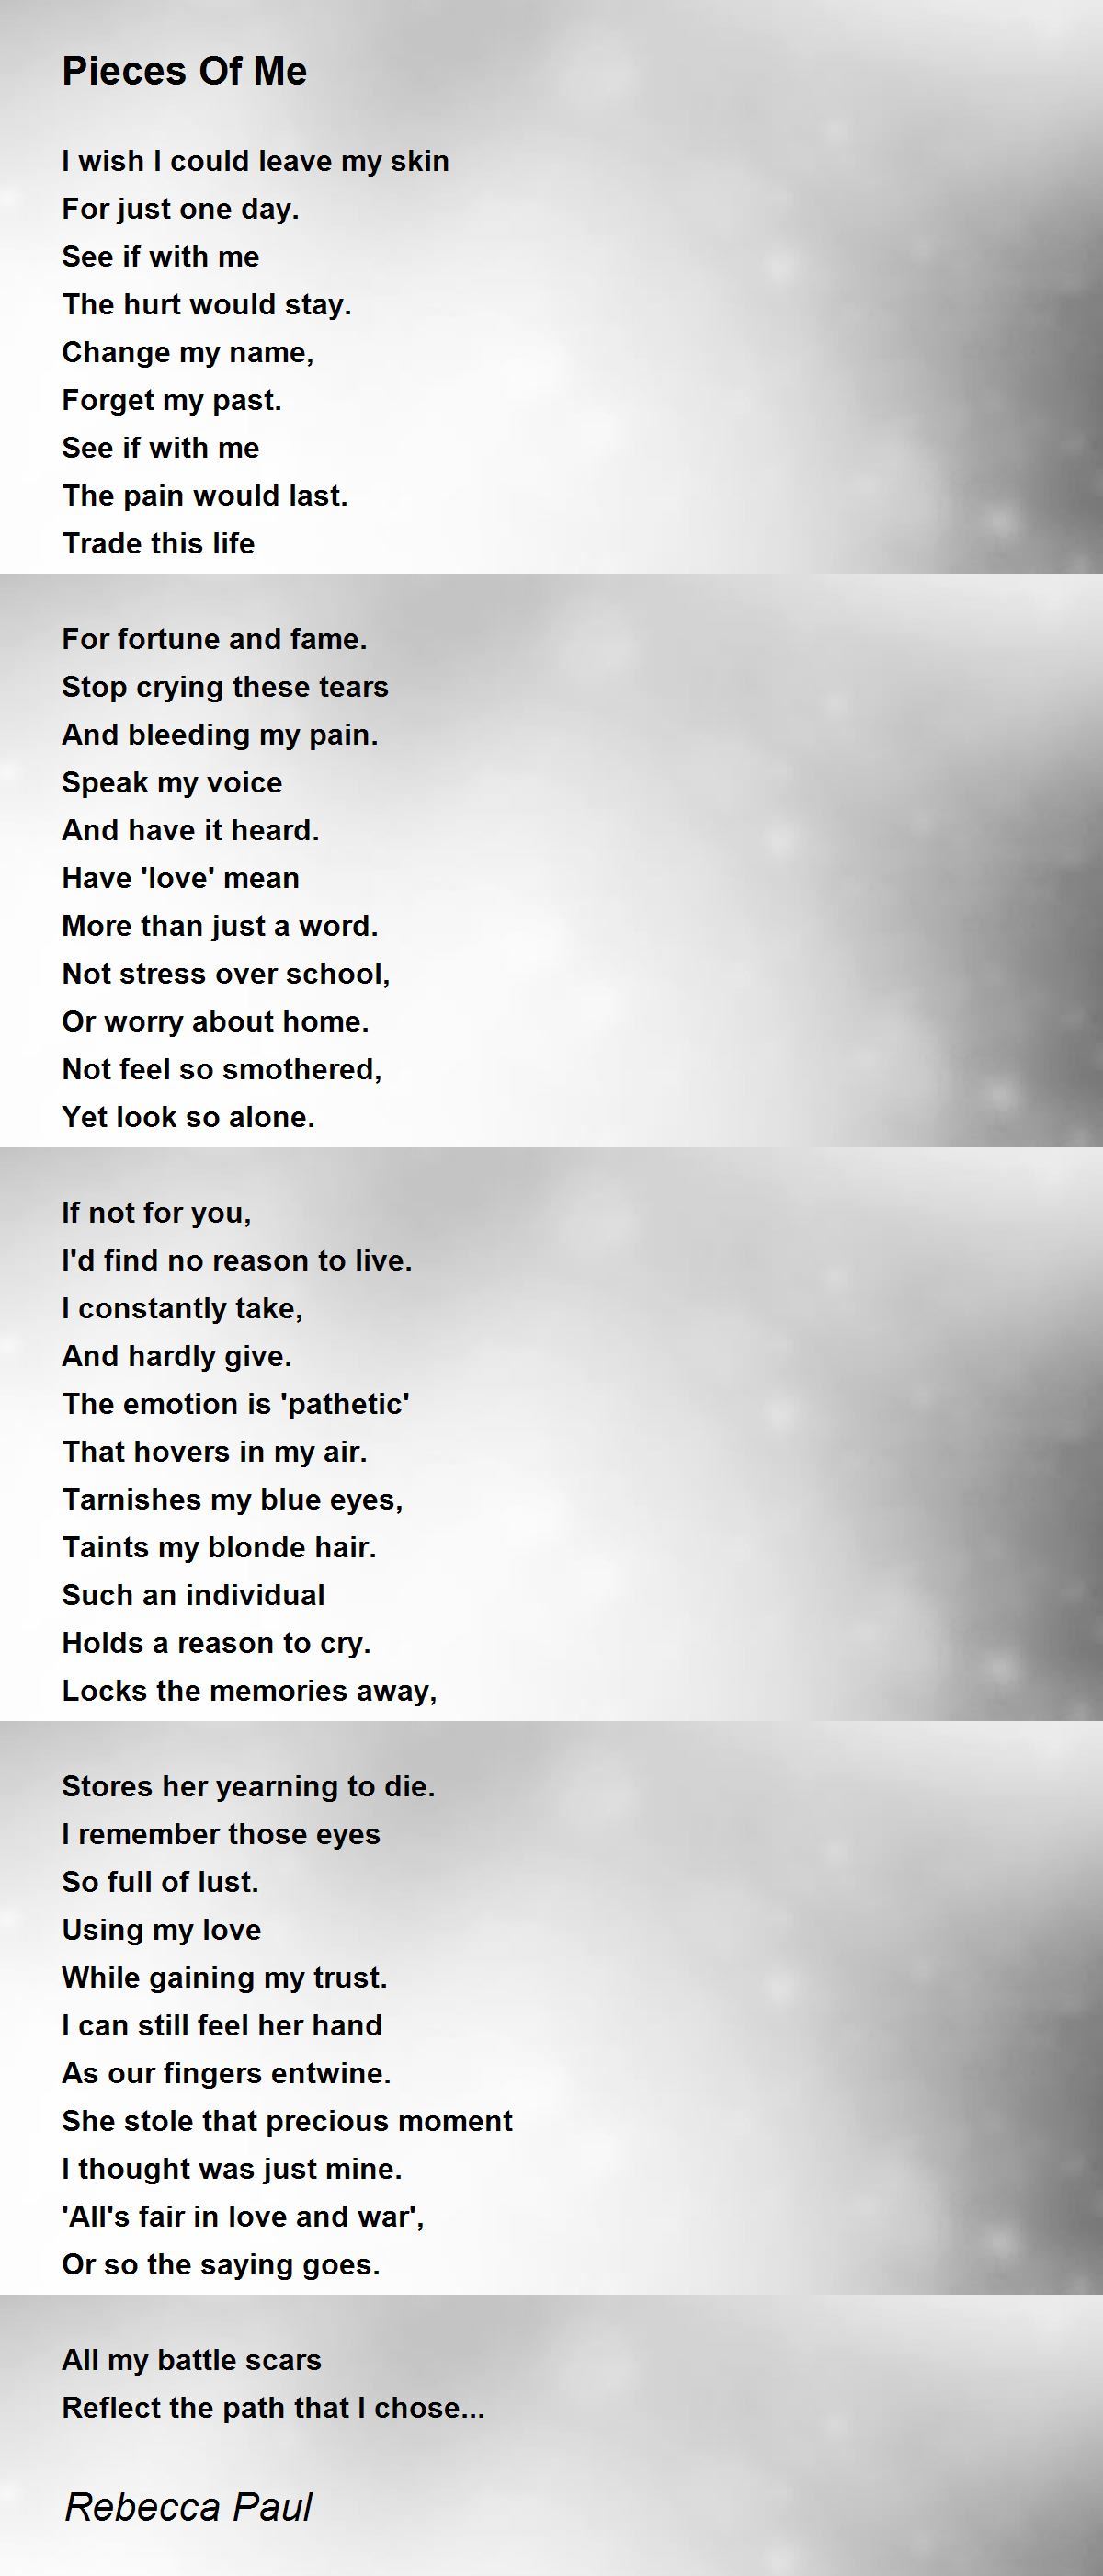 Pieces Of Me - Pieces Of Me Poem by ESPN CHICK